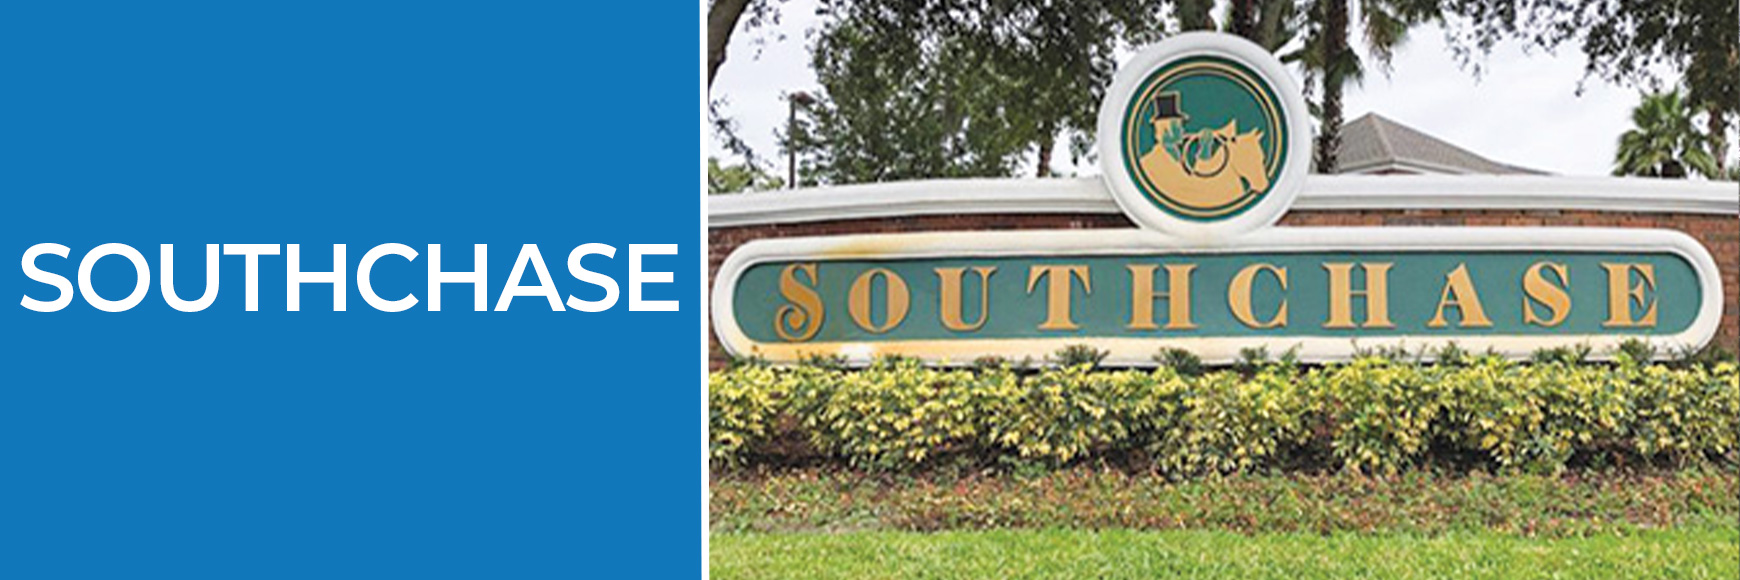 SouthChase Real Estate -Orlando Homes Sales-Comunidades de Orlando - Orlando Homes Sales